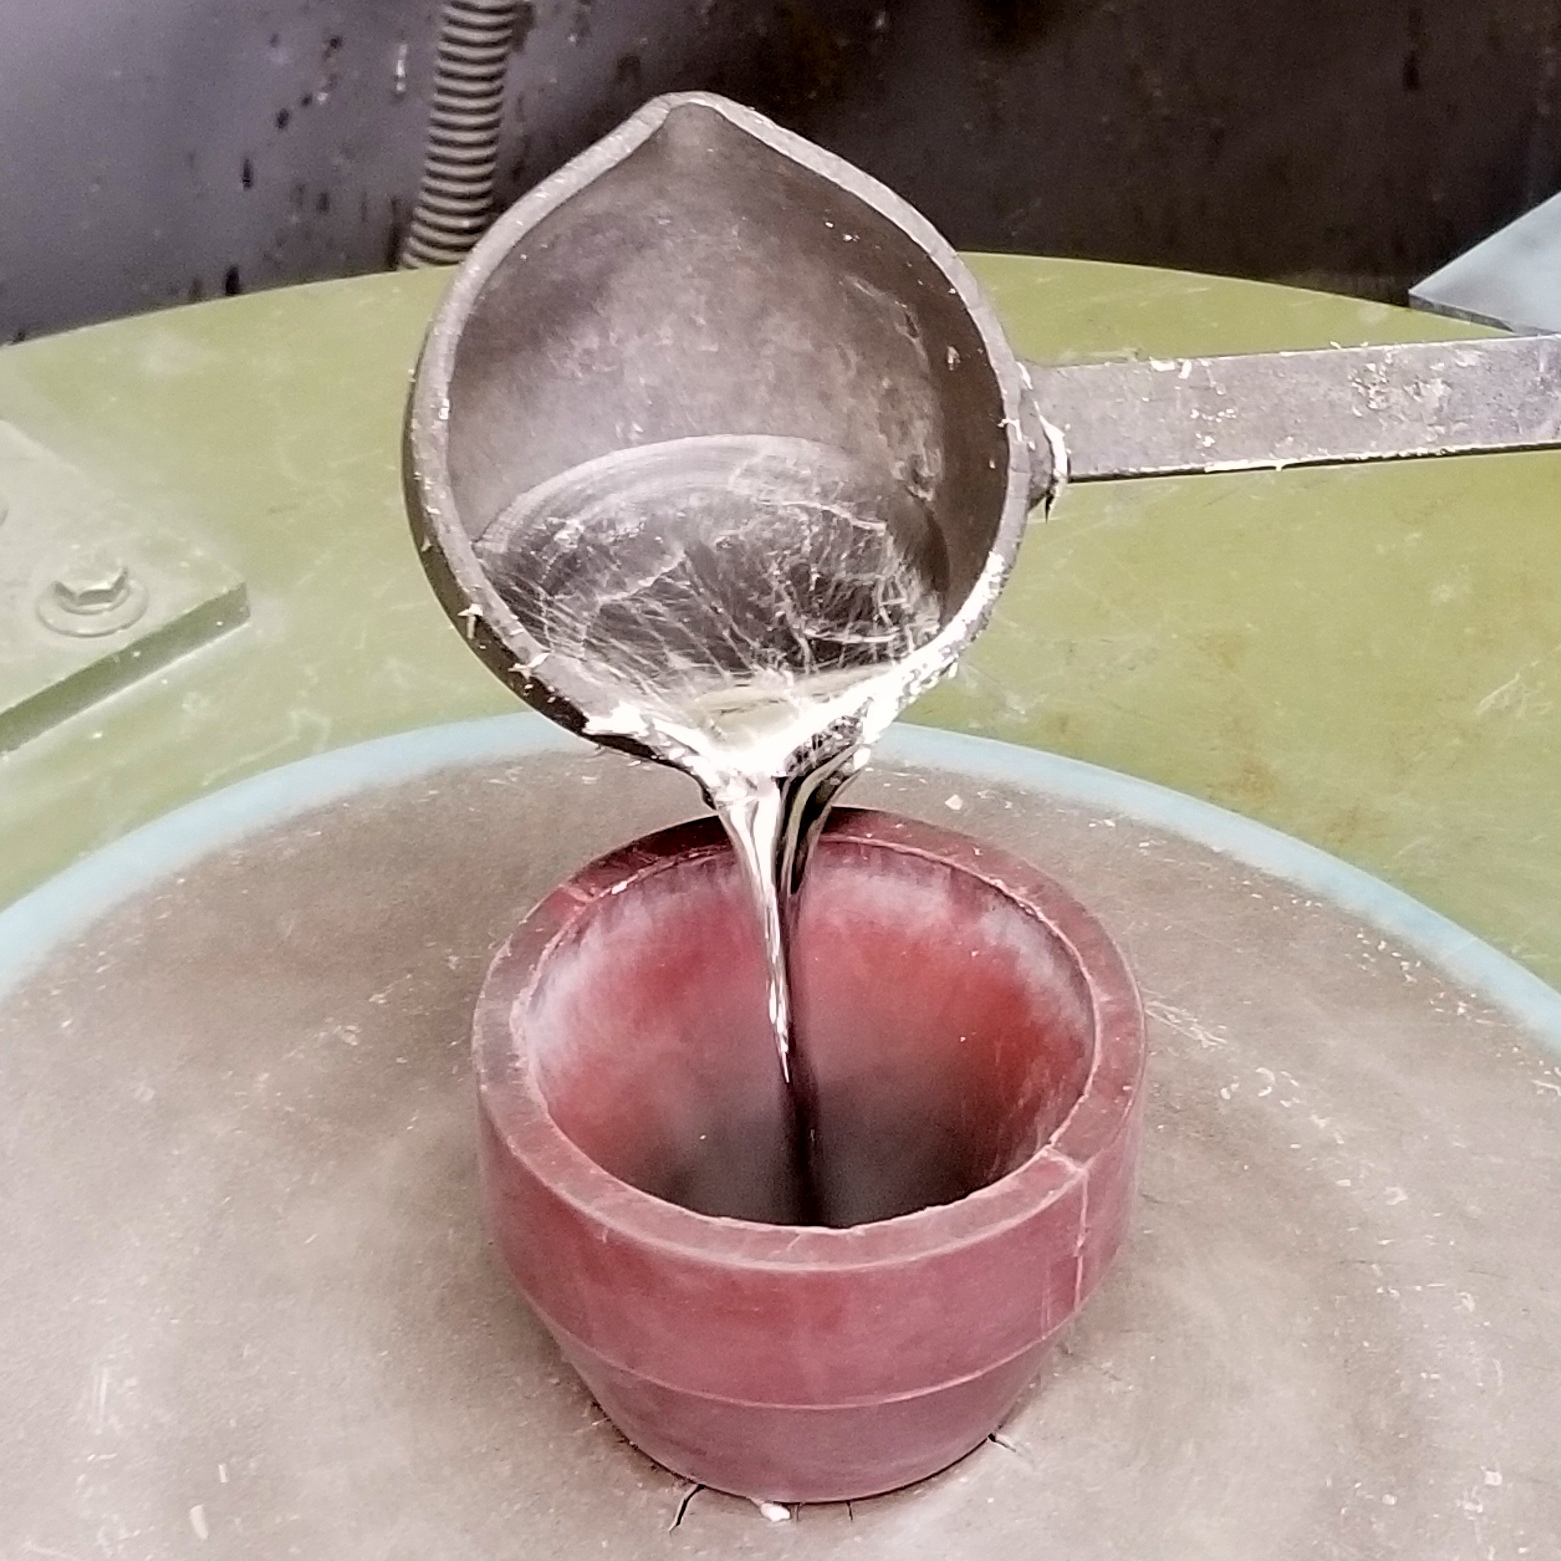 Pouring molten pewter into the mold